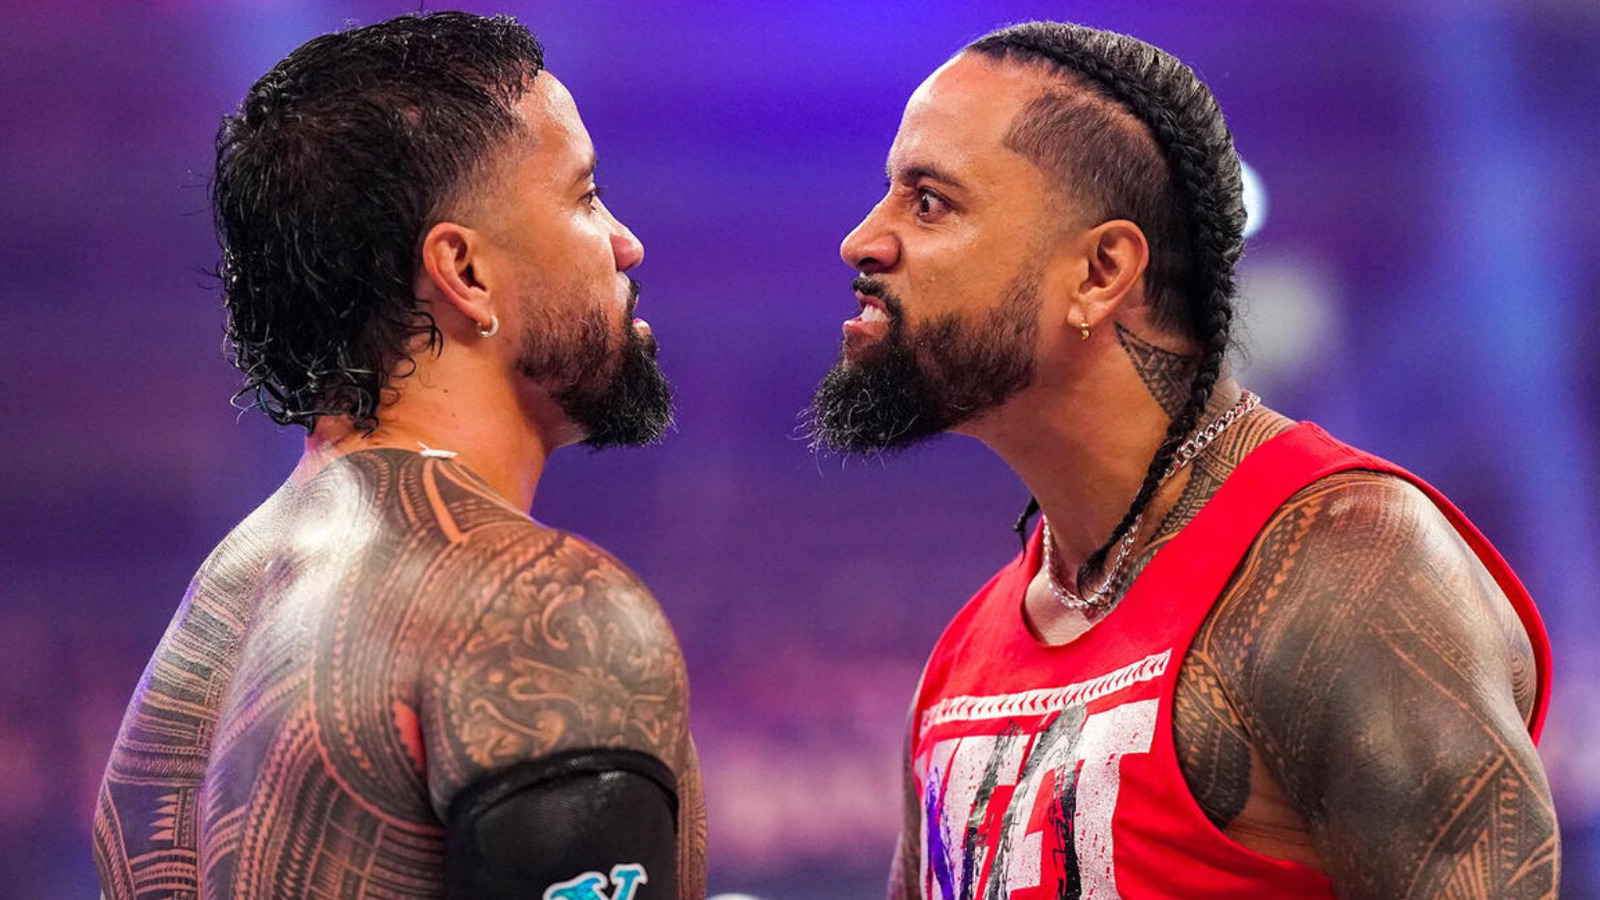 Lance Anoa'i Predicts Winner Of Potential Jimmy Vs. Jey Uso Match In WWE